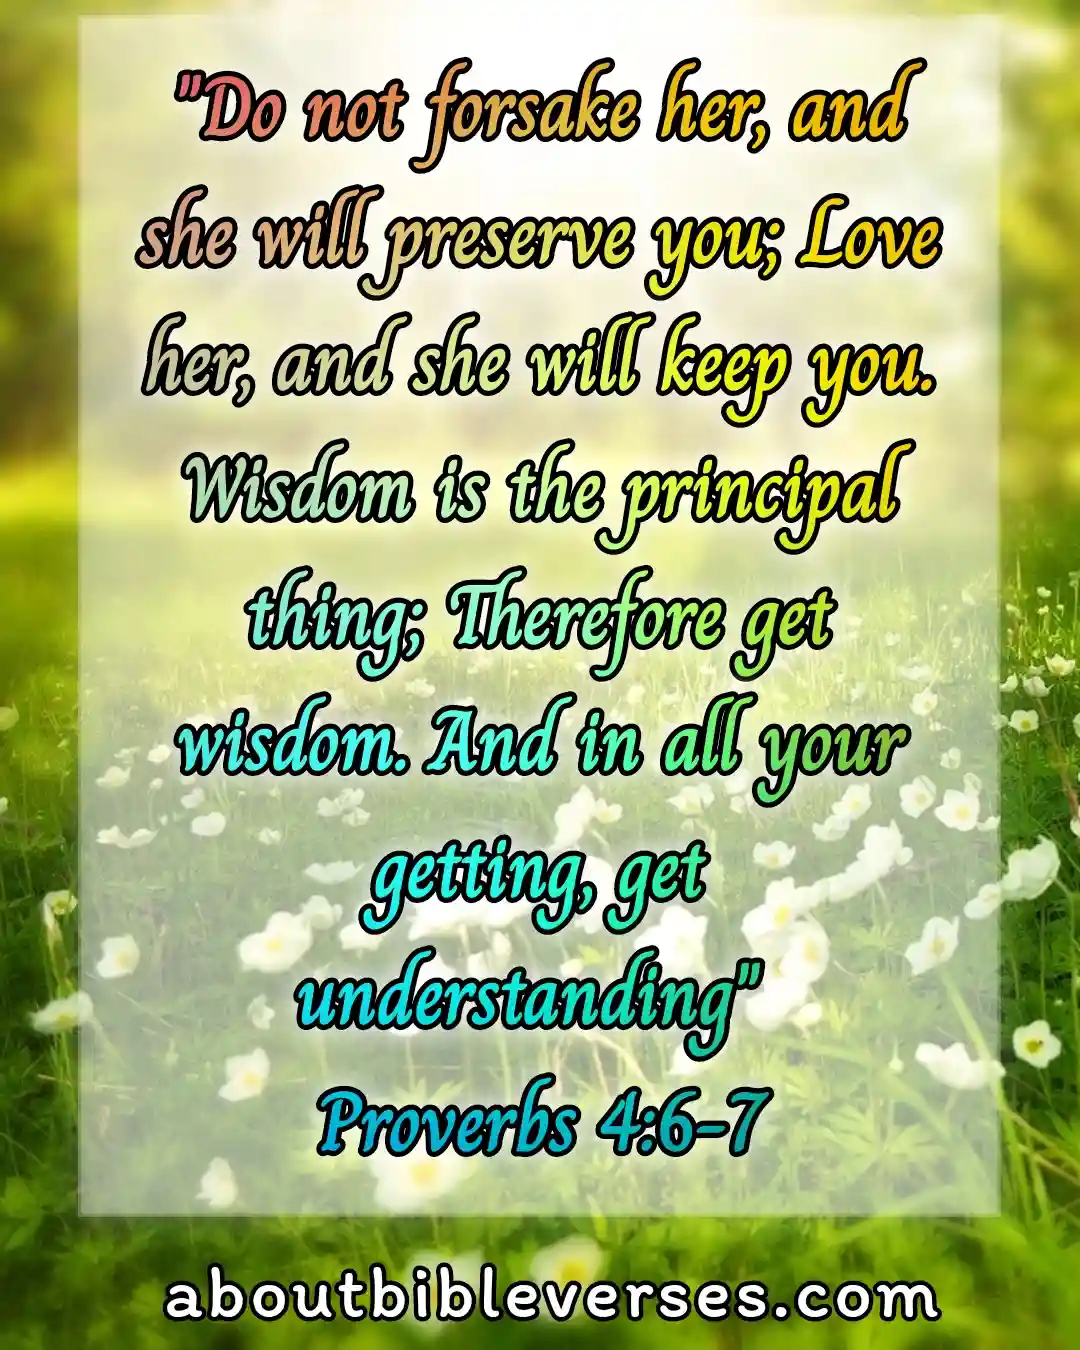 bible verses about wisdom (Proverbs 4:6-7)